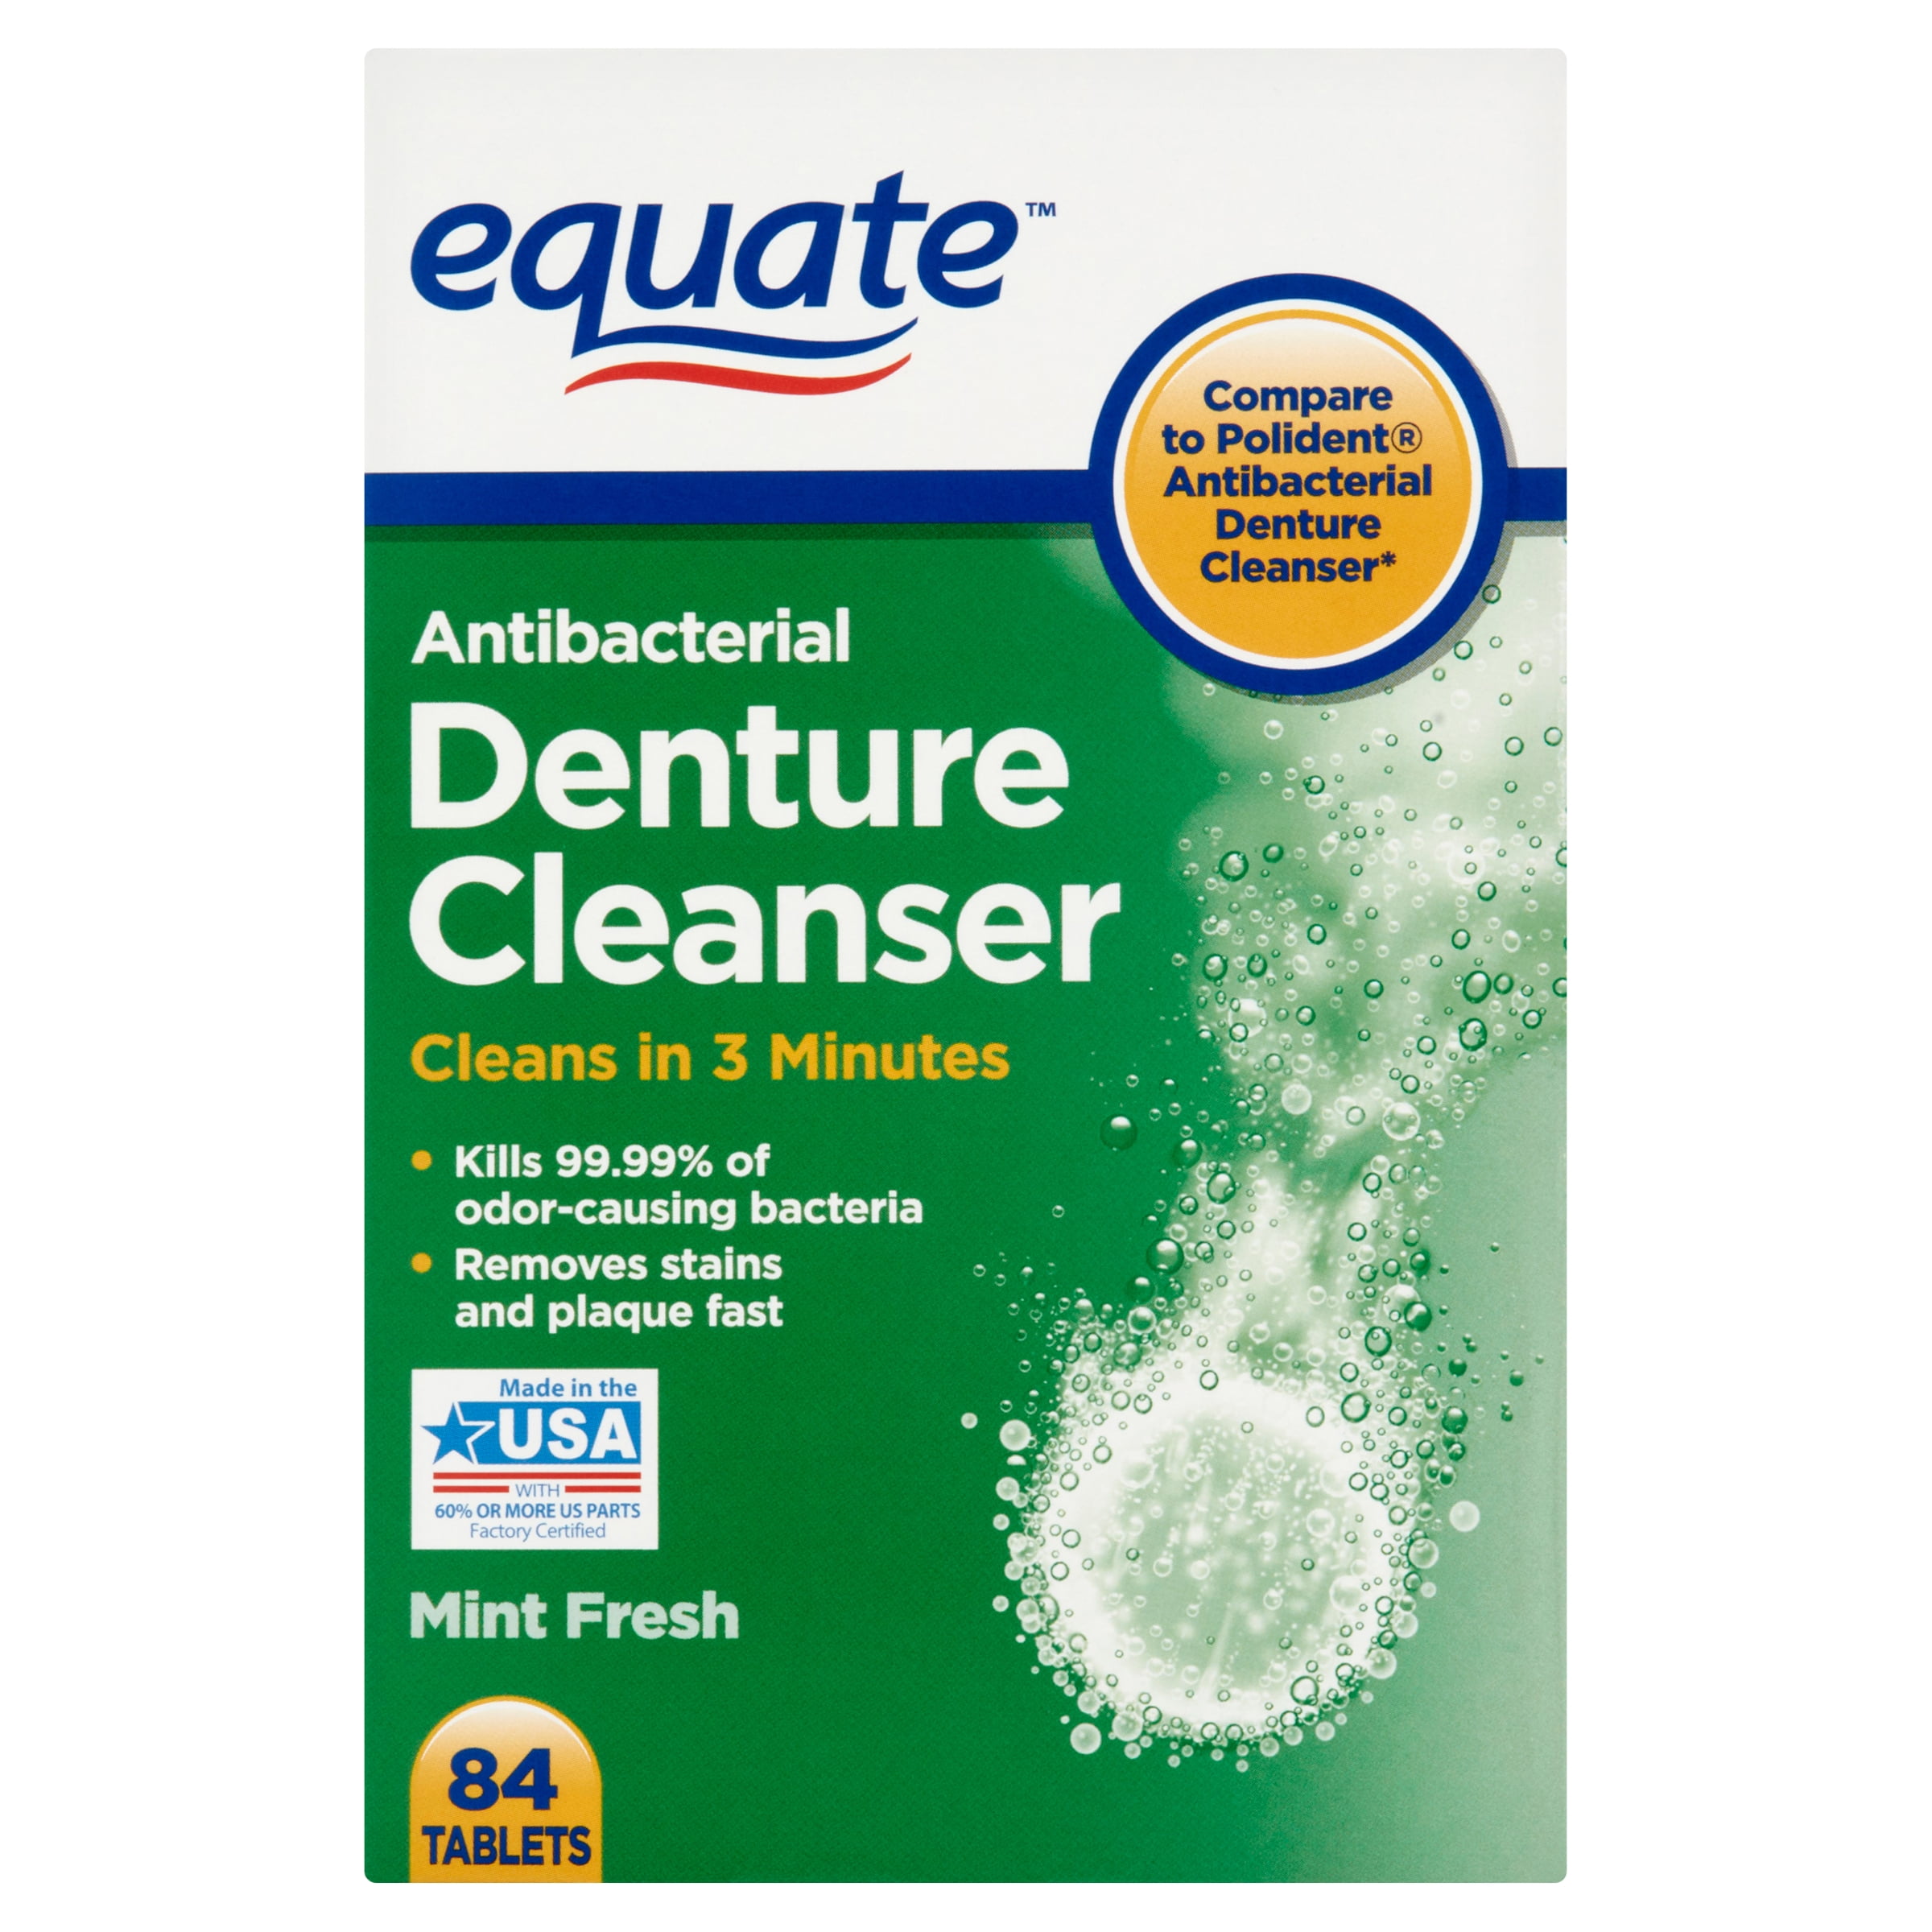 Equate Antibacterial Denture Cleansers Tablets, 84 Count